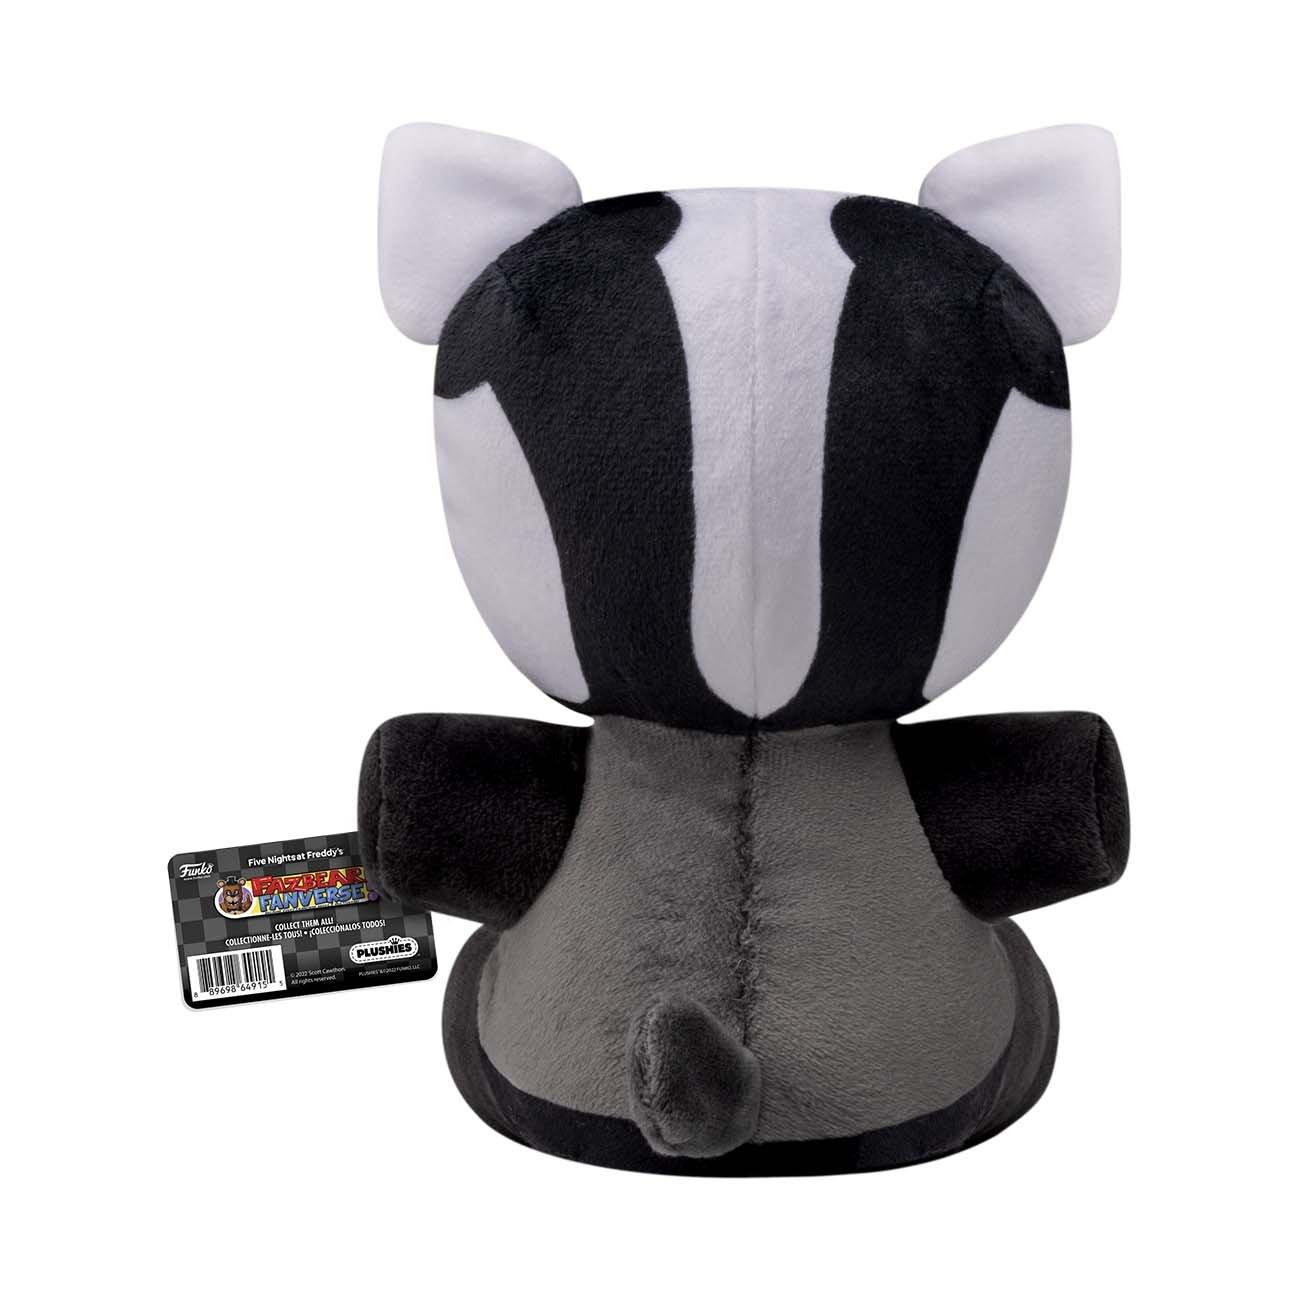 list item 3 of 3 Funko Plush Five Nights at Freddy's Fanverse Blake the Badger GameStop Exclusive